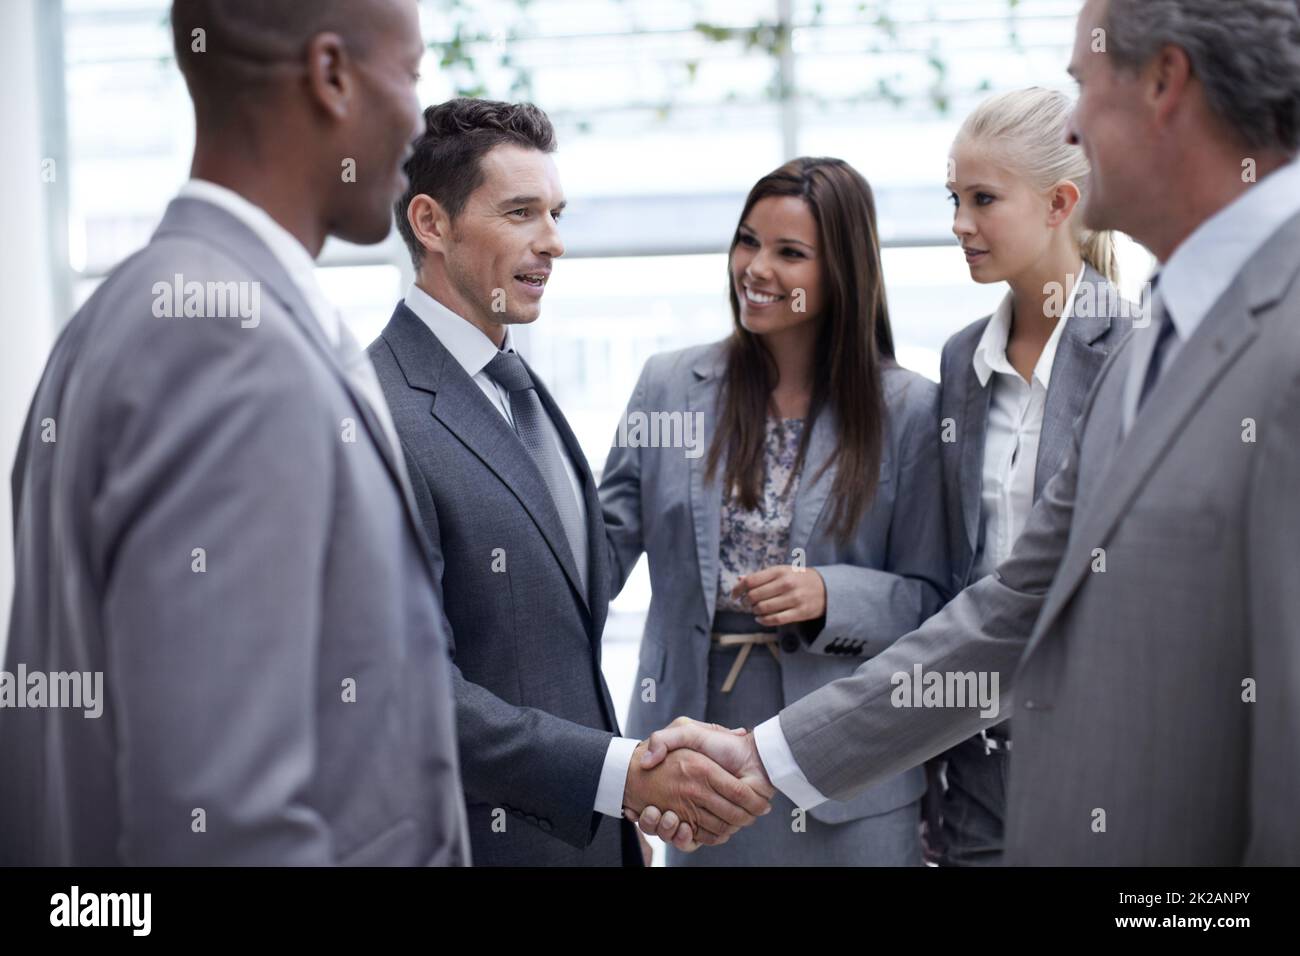 Climbing up the corporate ladder. A diverse group of businesspeople looking on as a coworker and their boss shake hands. Stock Photo